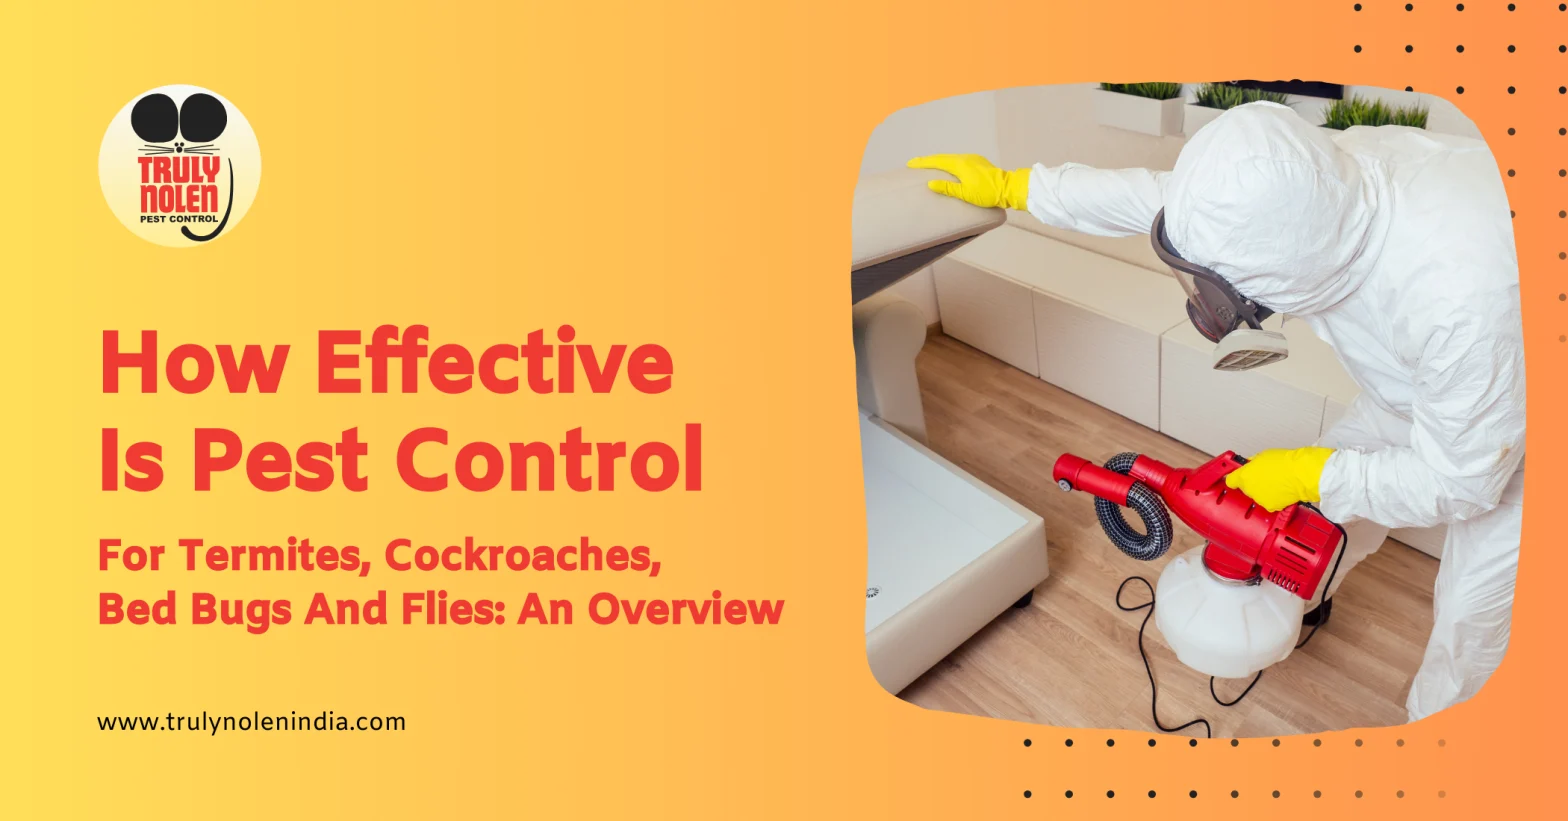 How Effective Is Pest Control For Termites, Cockroaches, Bed Bugs And Flies: An Overview